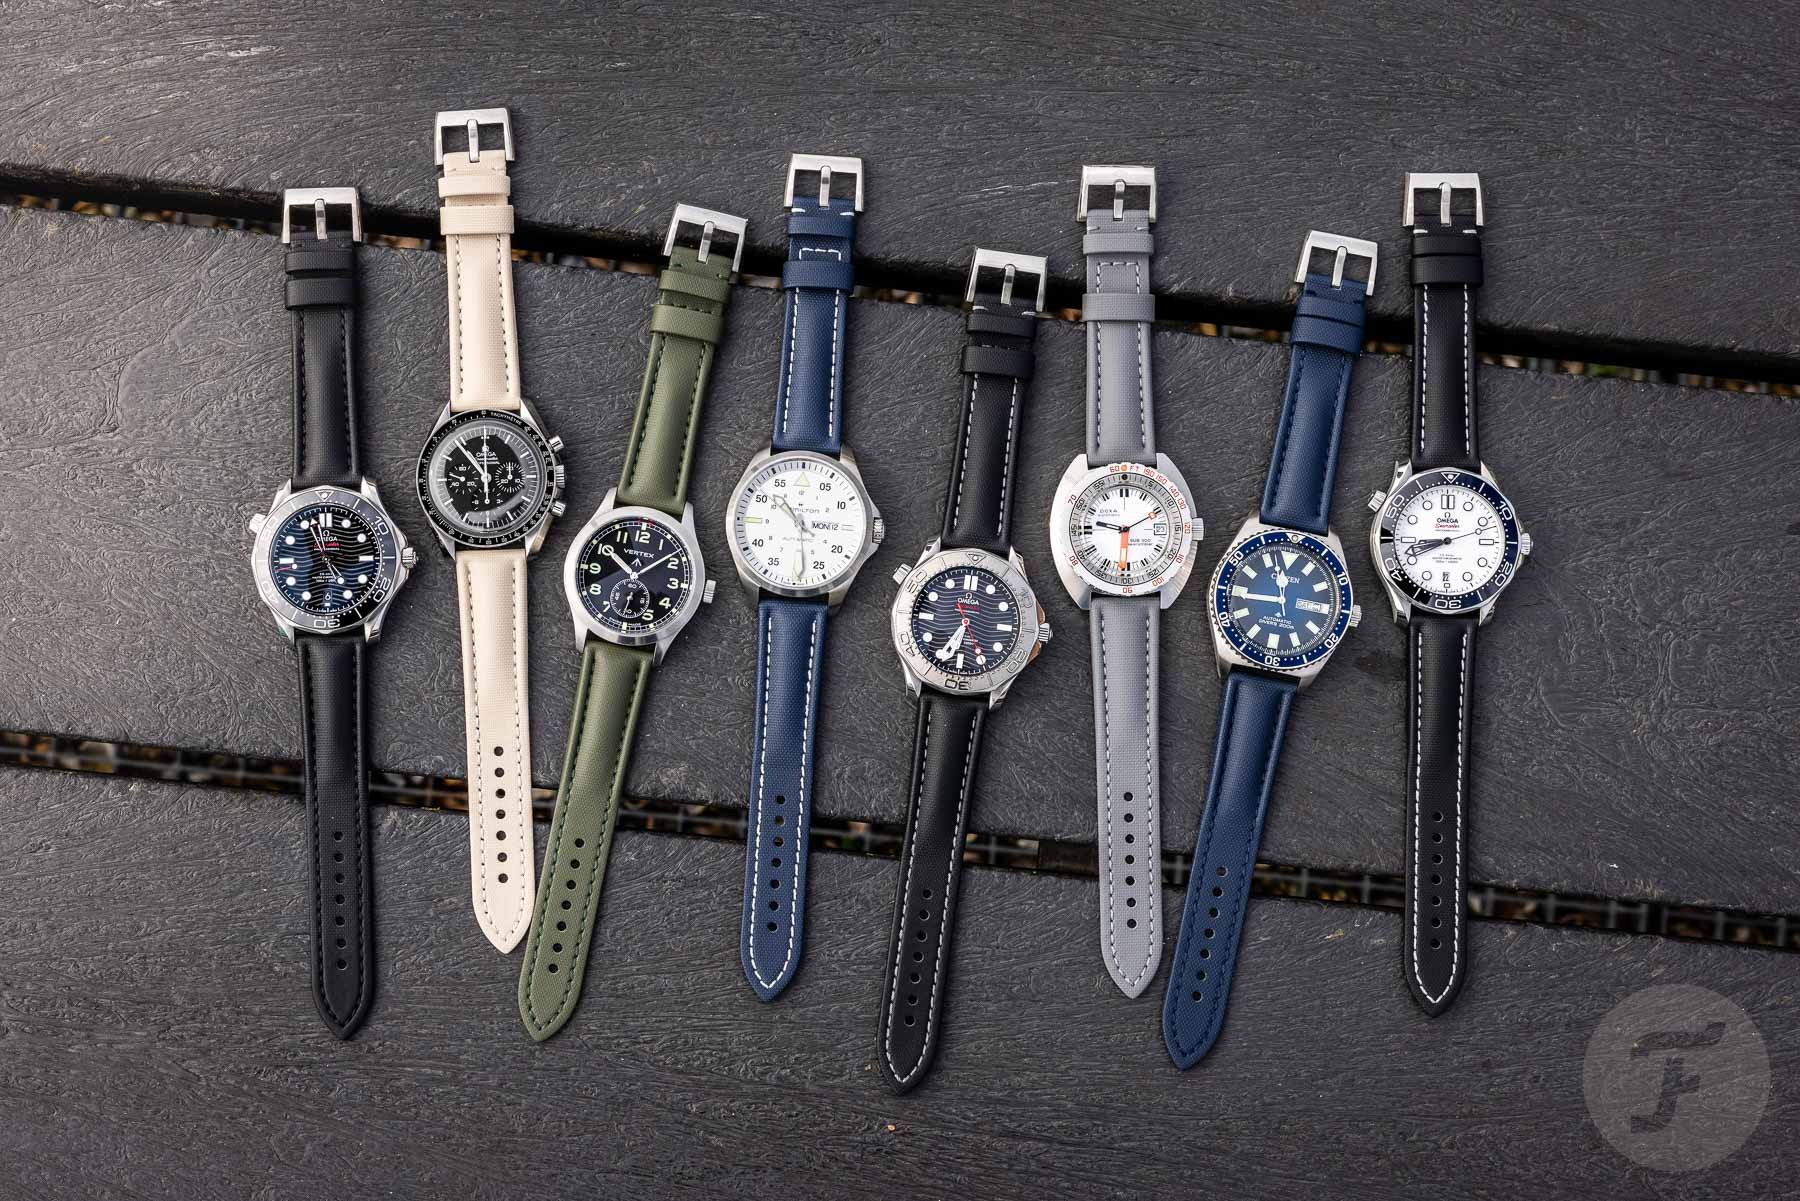 Artem Updates And Improves Its Classic Sailcloth Watch Strap With Pin Buckle